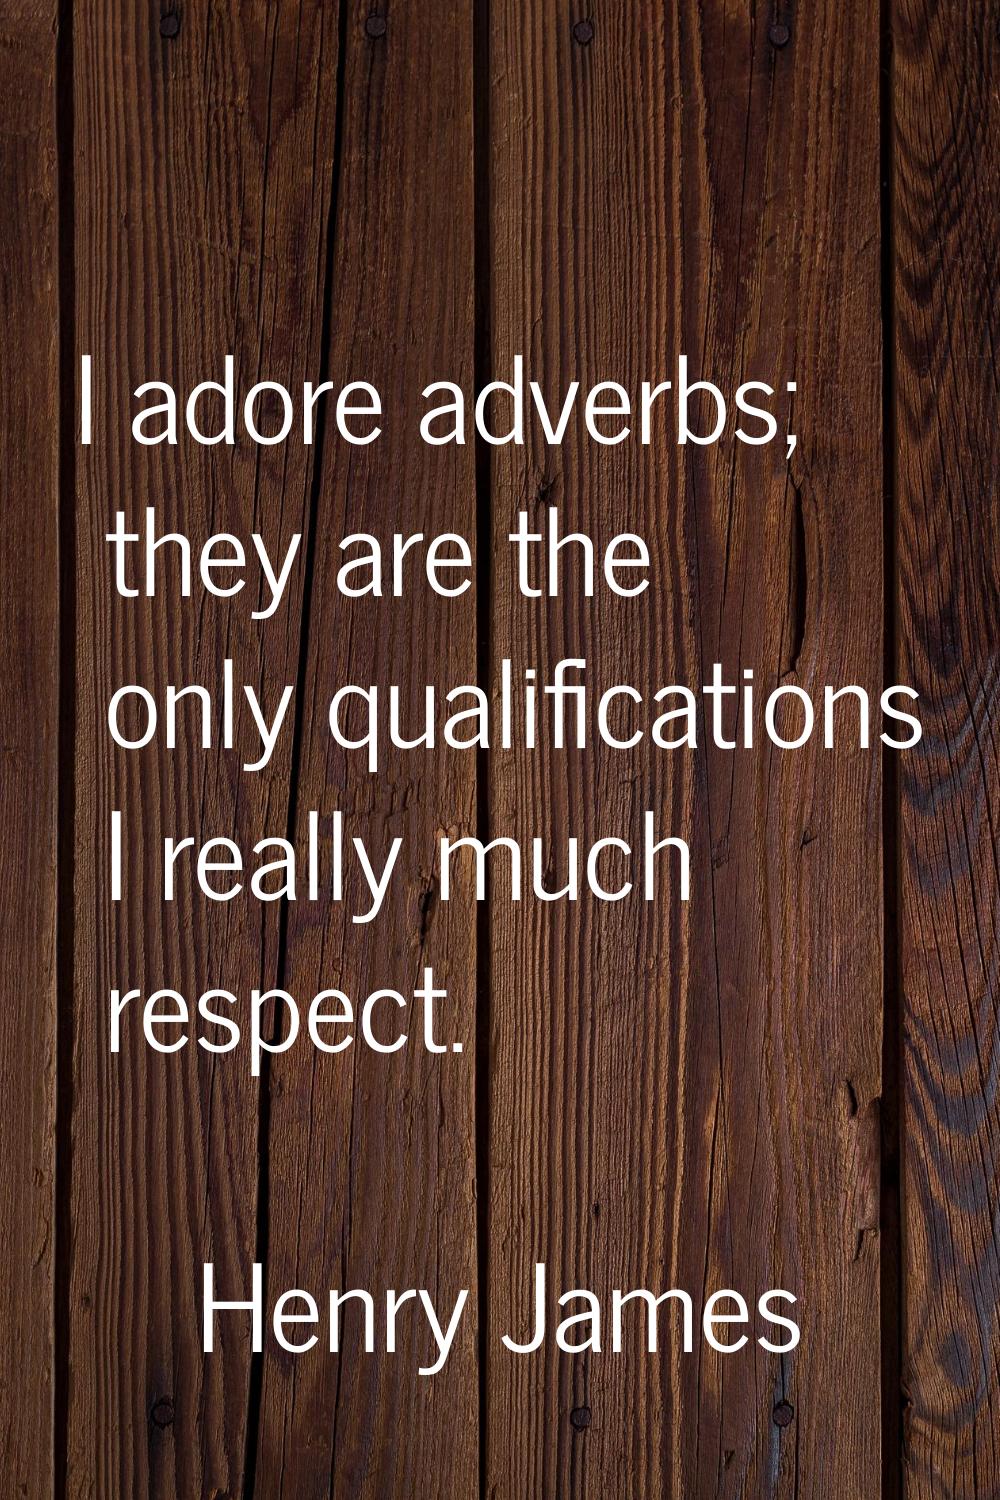 I adore adverbs; they are the only qualifications I really much respect.